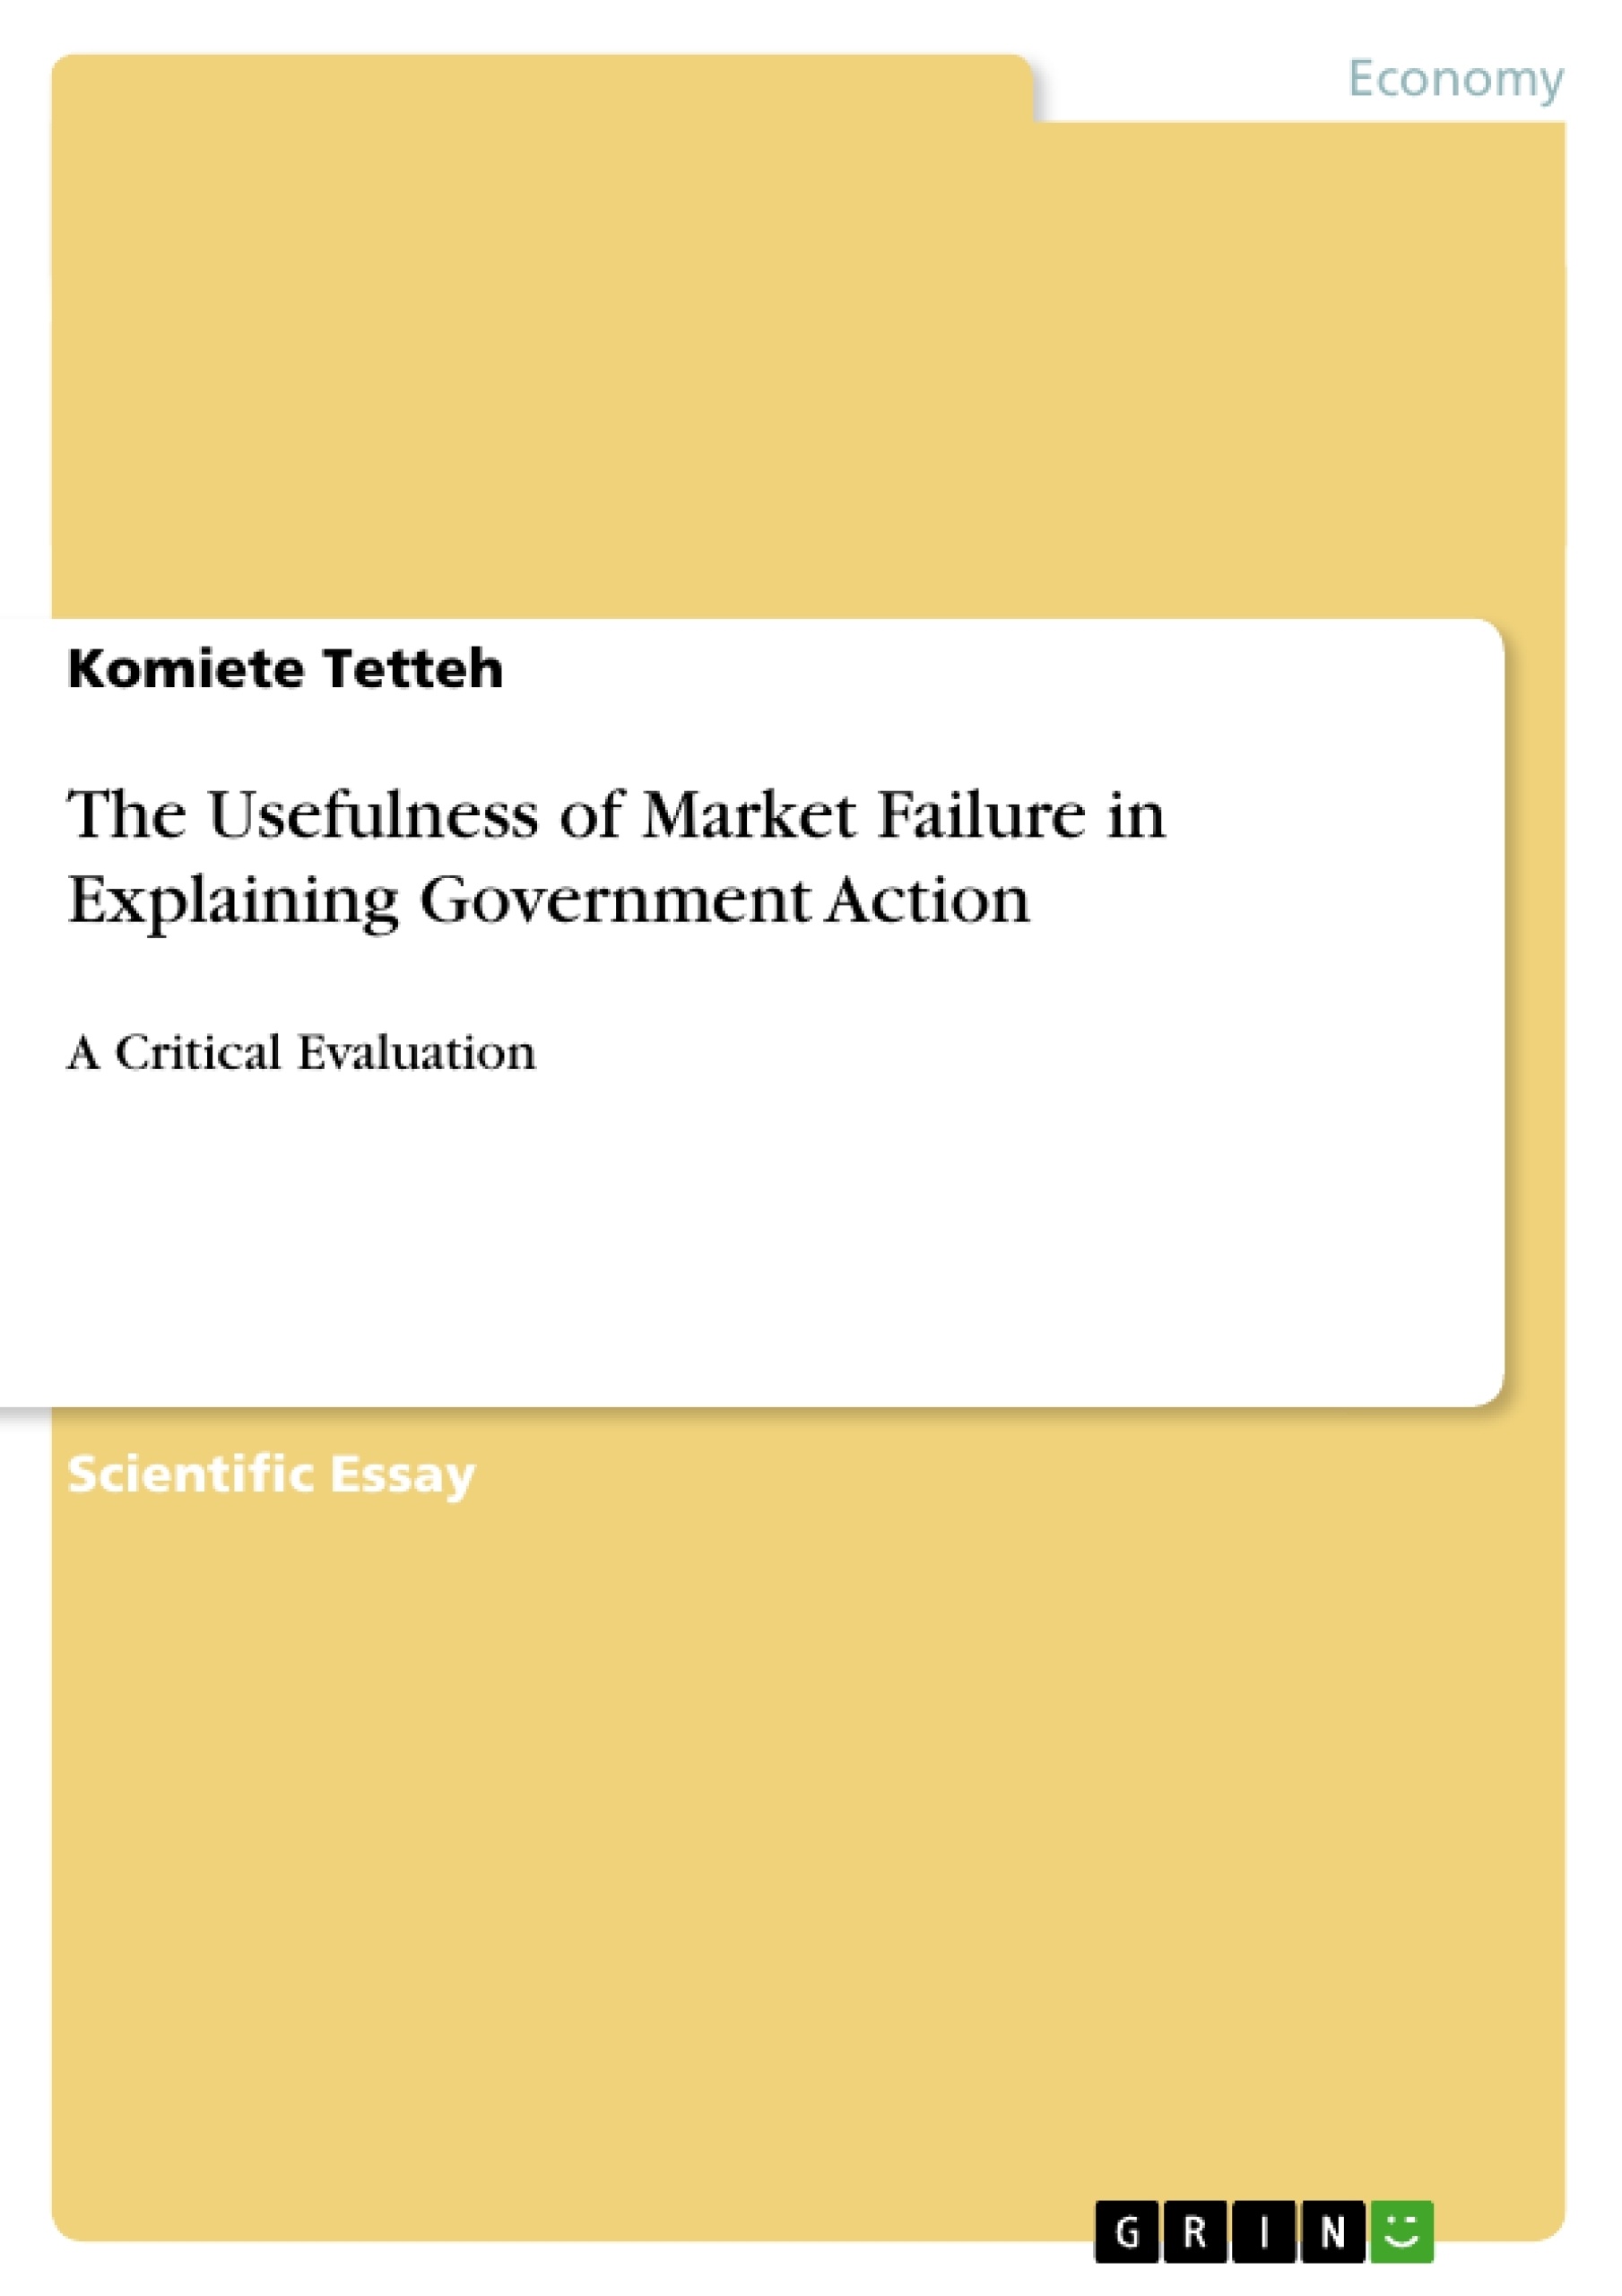 Title: The Usefulness of Market Failure in Explaining Government Action